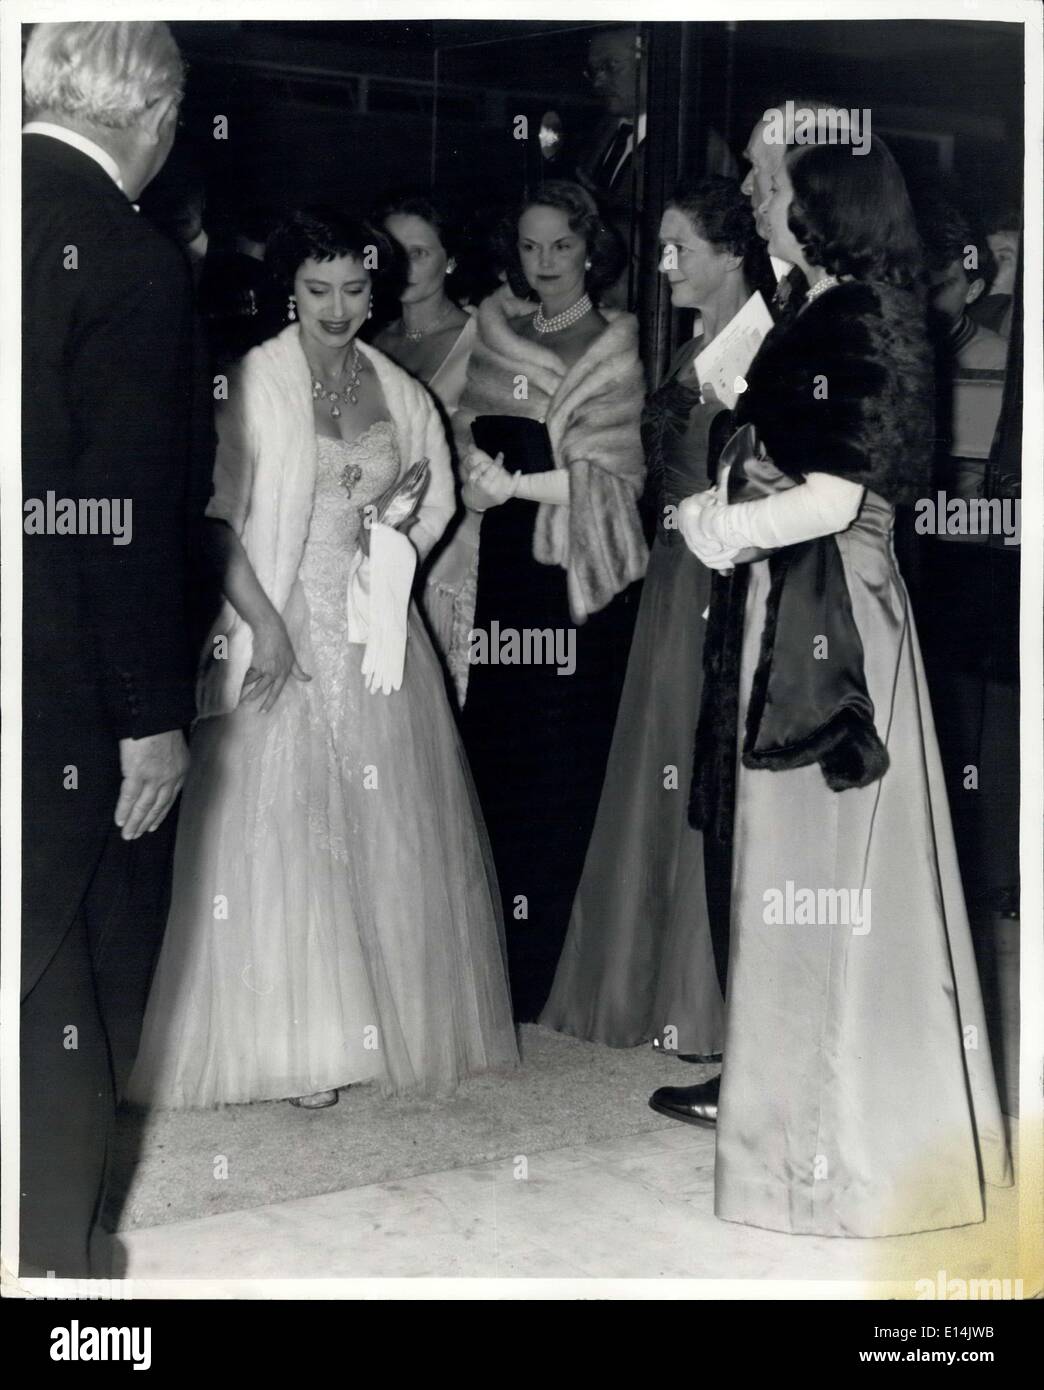 Apr. 05, 2012 - Princess Margaret performed the opening ceremony of the new National Film Theatre building on the South Bank (London) this evening (Tuesday). Photo Shows: Princess Margaret arriving at the National Film Theatre for the opening ceremony this evening. 15/10/57 Stock Photo